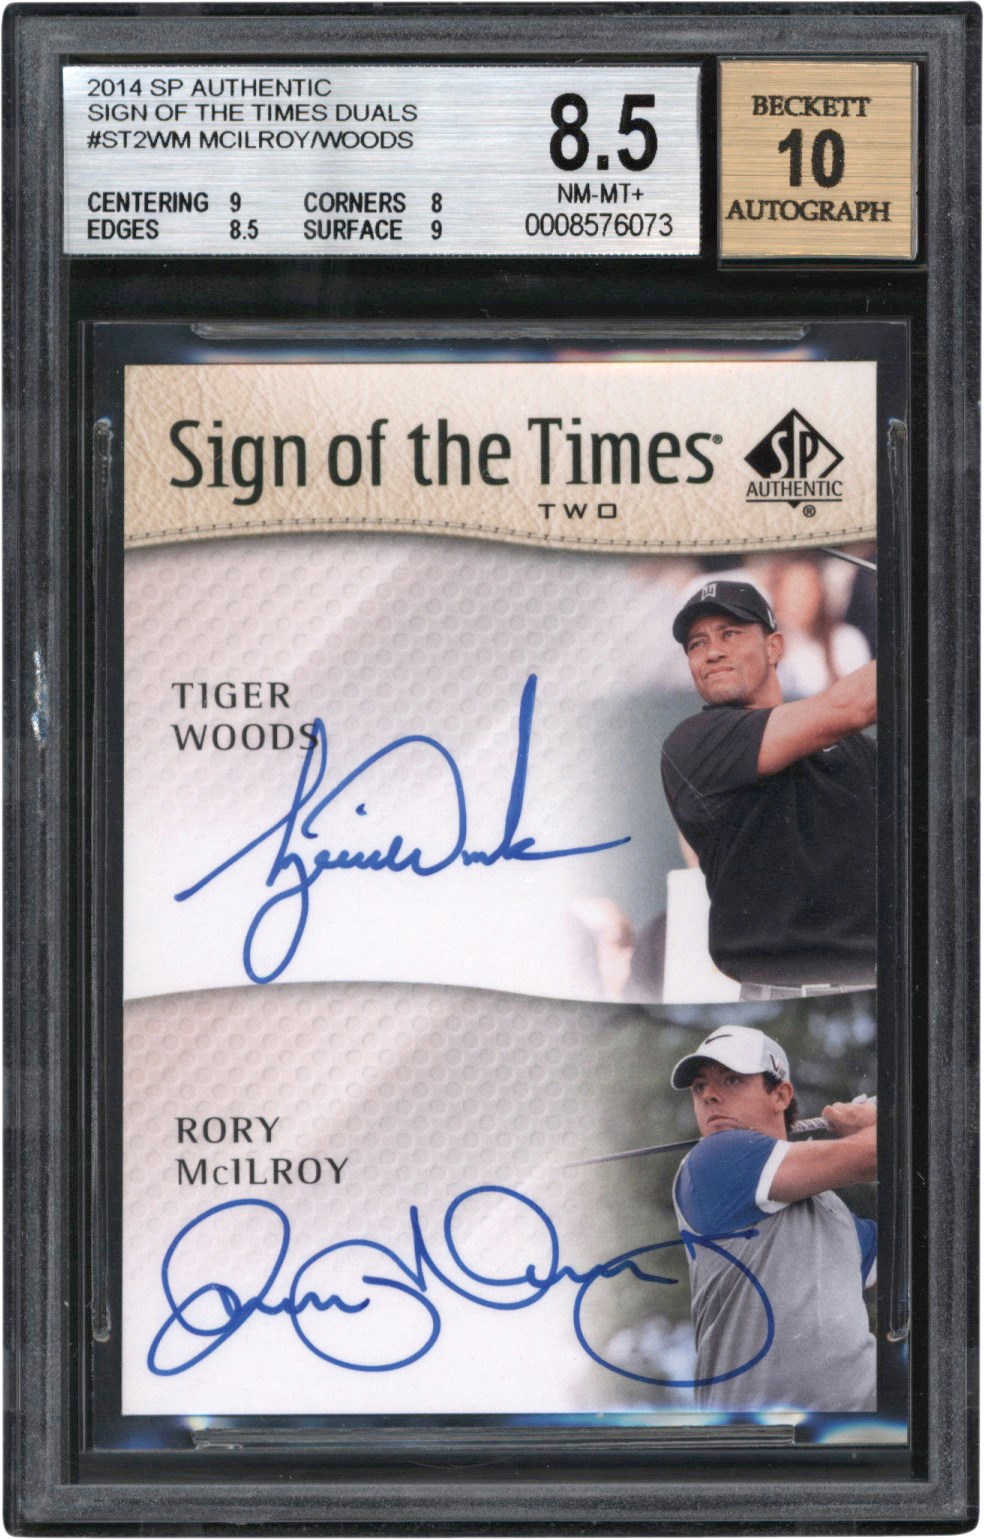 - 2014 SP Authentic Golf Sign of the Times Duals #ST2WM Tiger Woods & Rory McIlroy Autograph Card BGS NM-MT+ 8.5 Auto 10